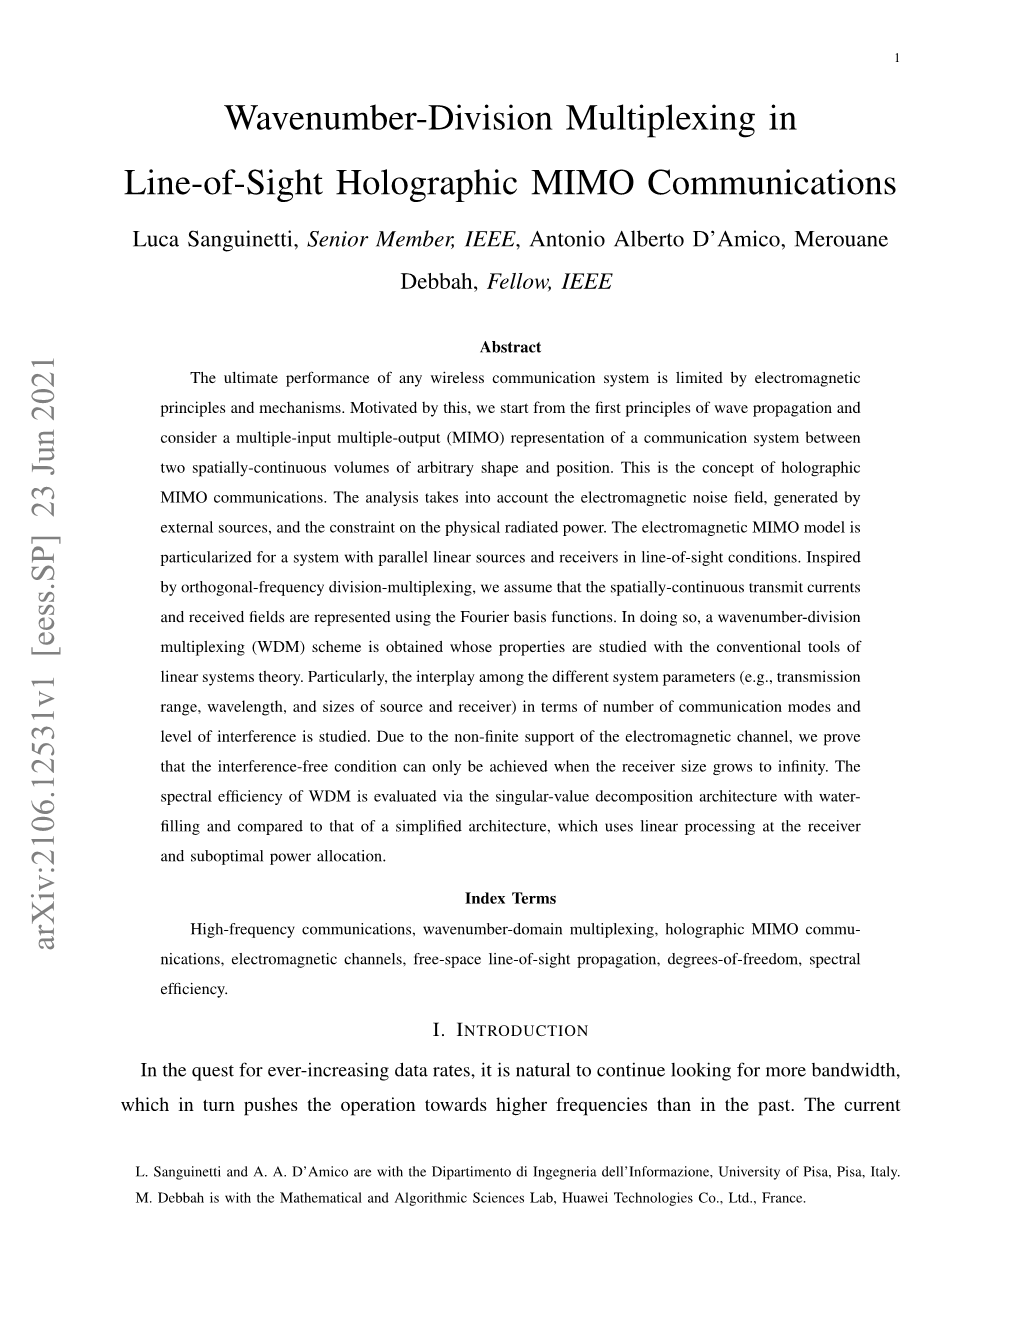 Wavenumber-Division Multiplexing in Line-Of-Sight Holographic MIMO Communications